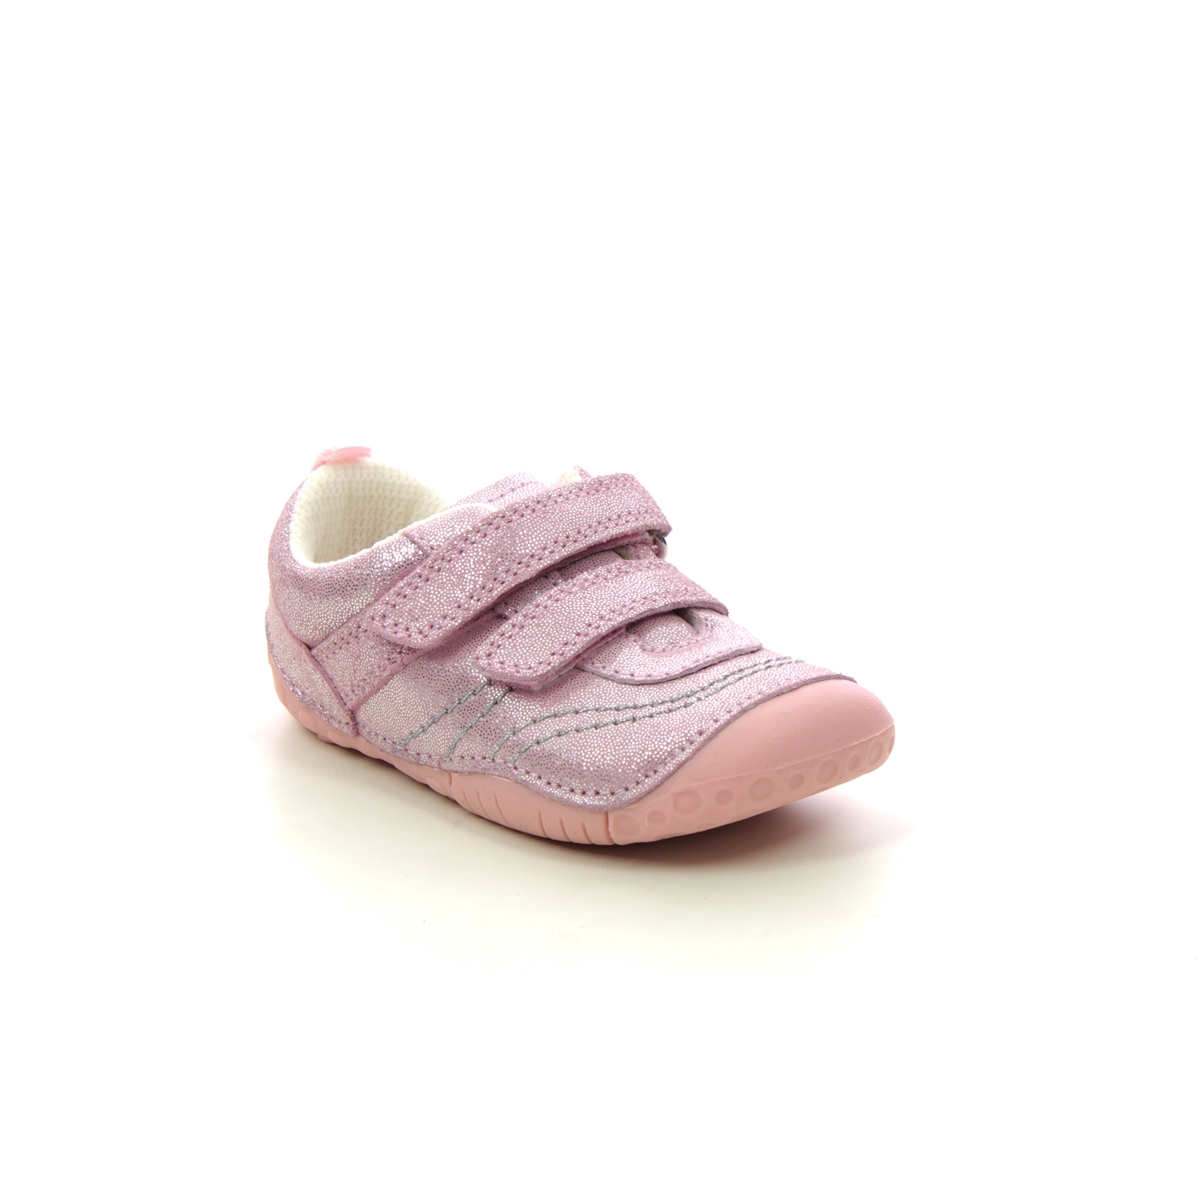 Start Rite Little Smile 2v Pink Glitter Kids girls first and baby shoes 0823-66F in a Plain  in Size 5